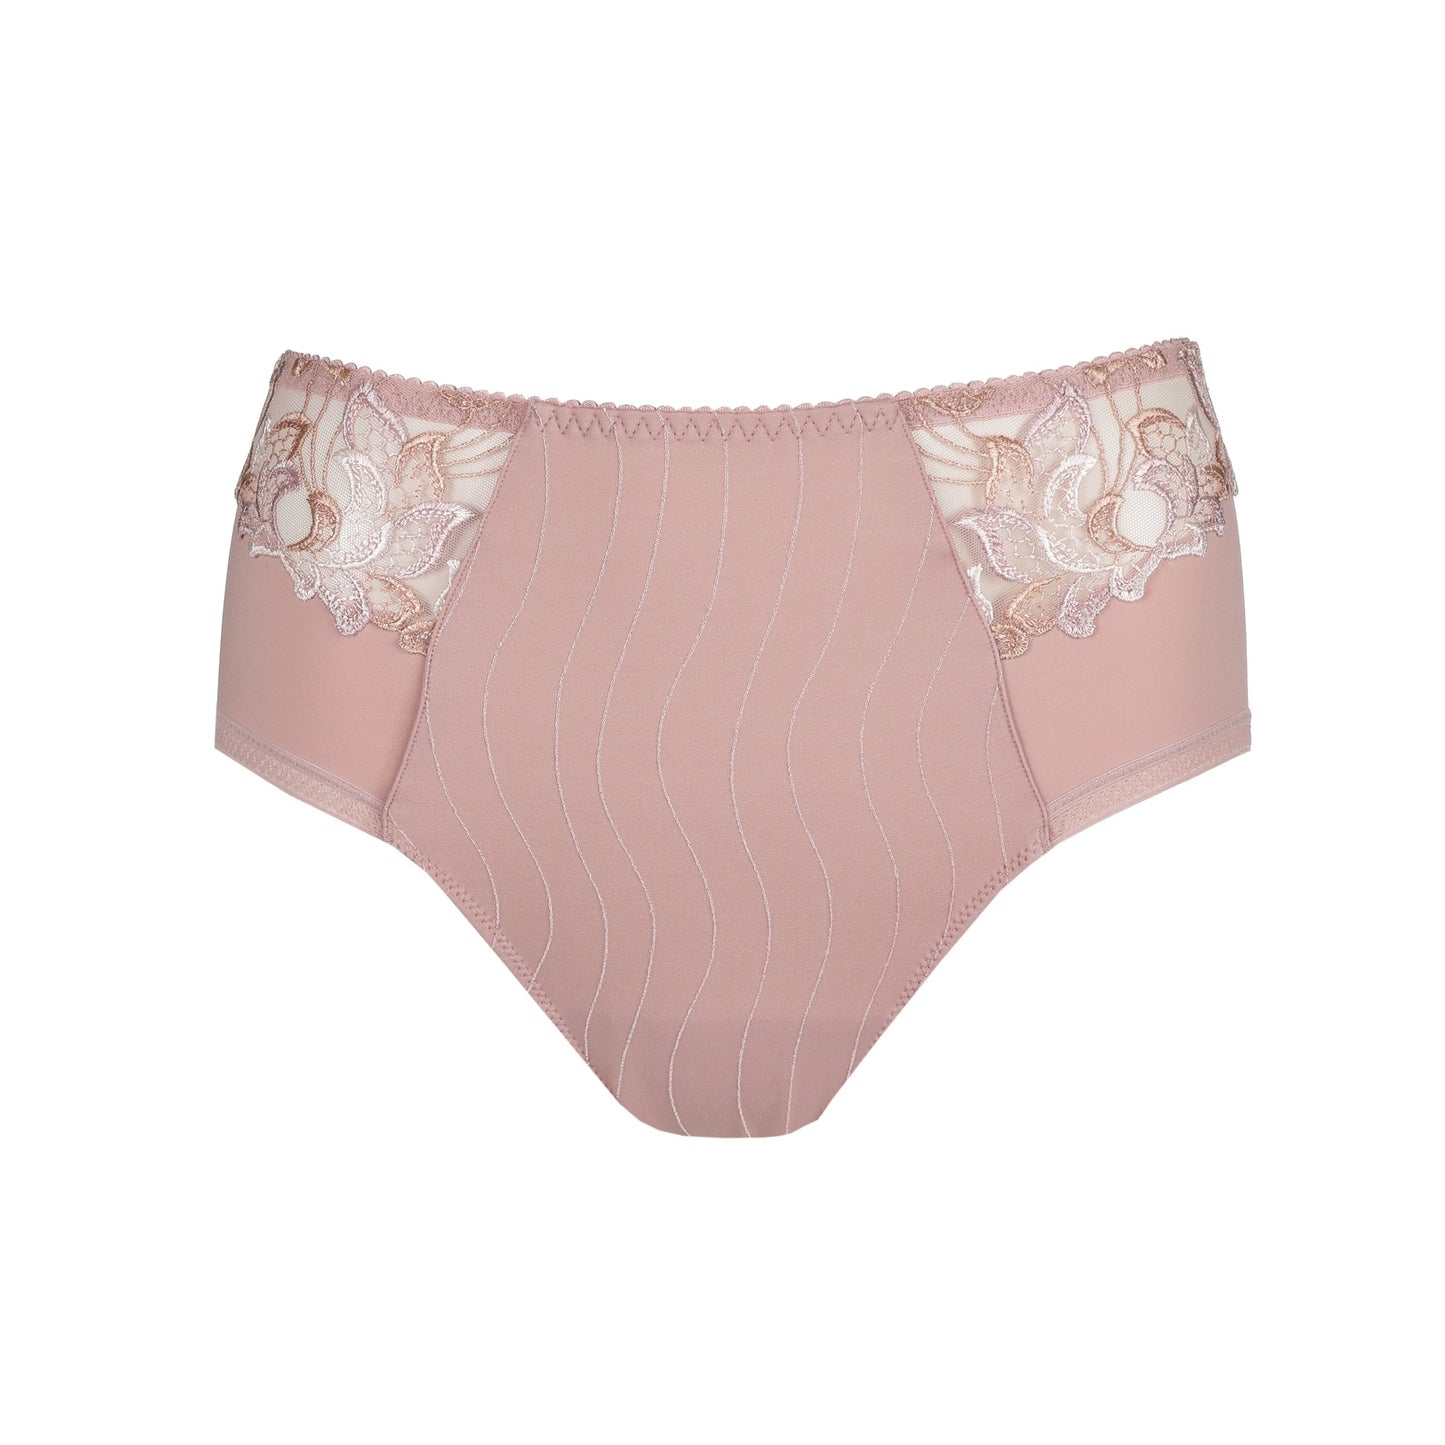 Deauville high-waisted full brief with luxurious lace in Vintage Pink by Primadonna.